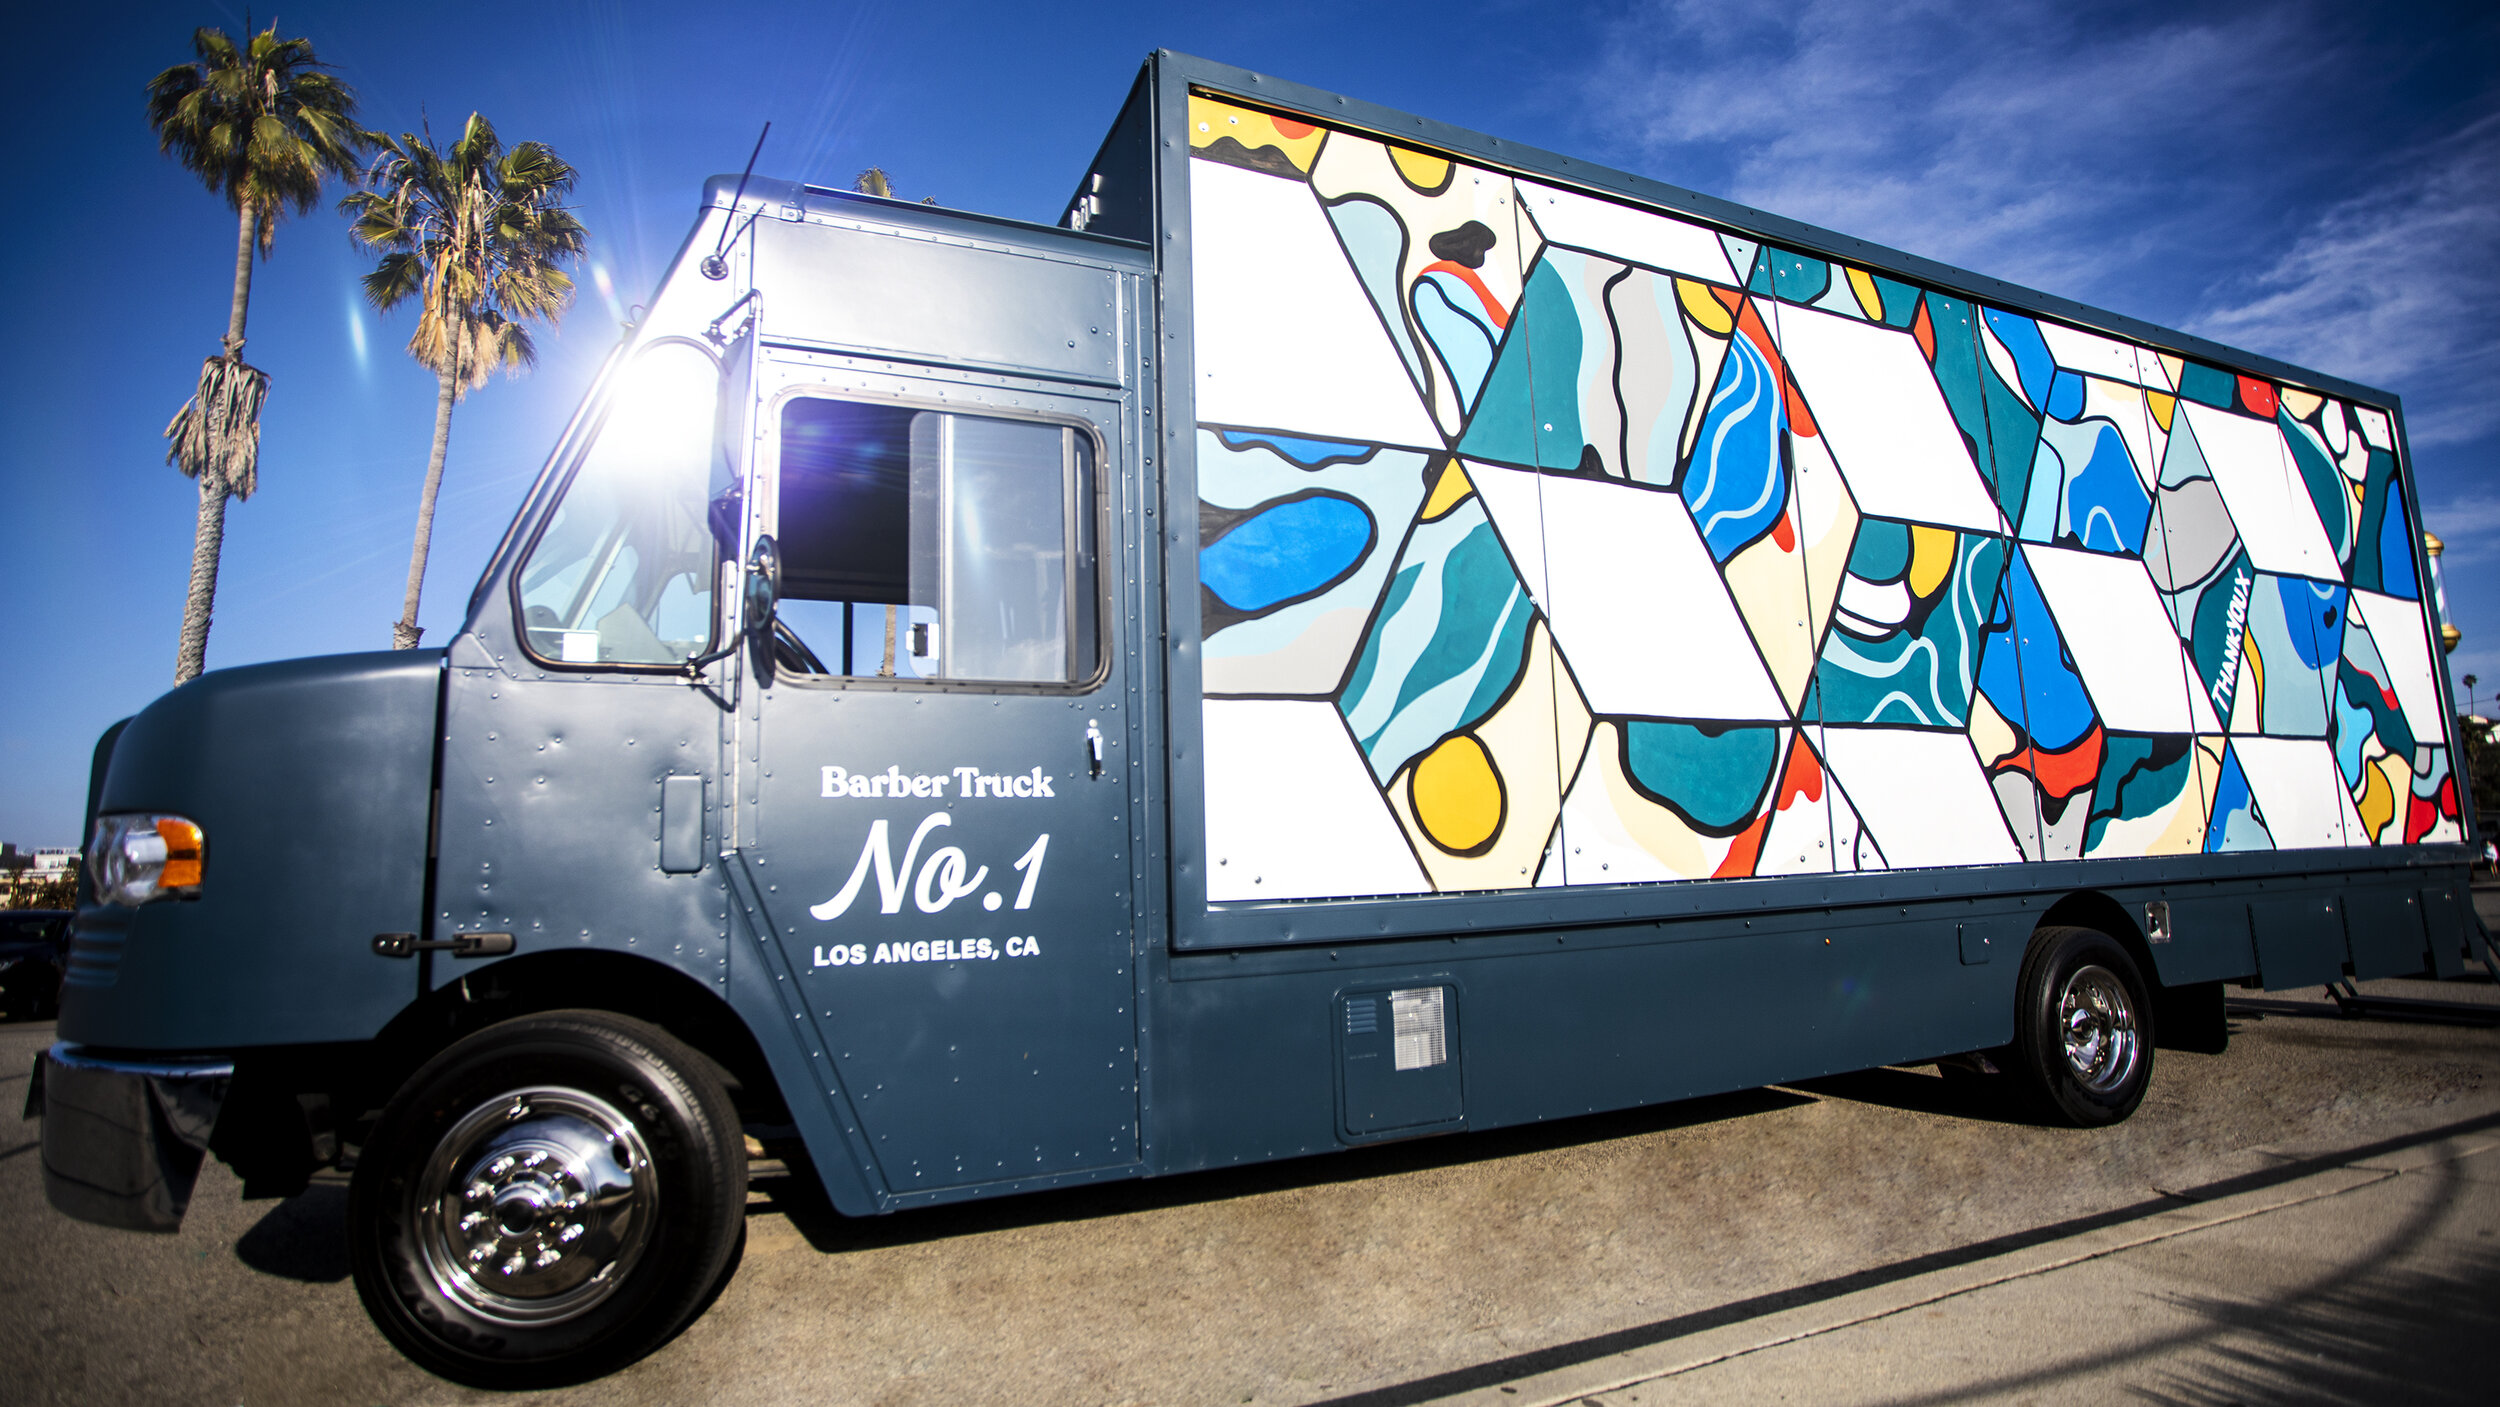 Barber Truck No. 1 exterior image of art wall with cubes mural by ThankYouX